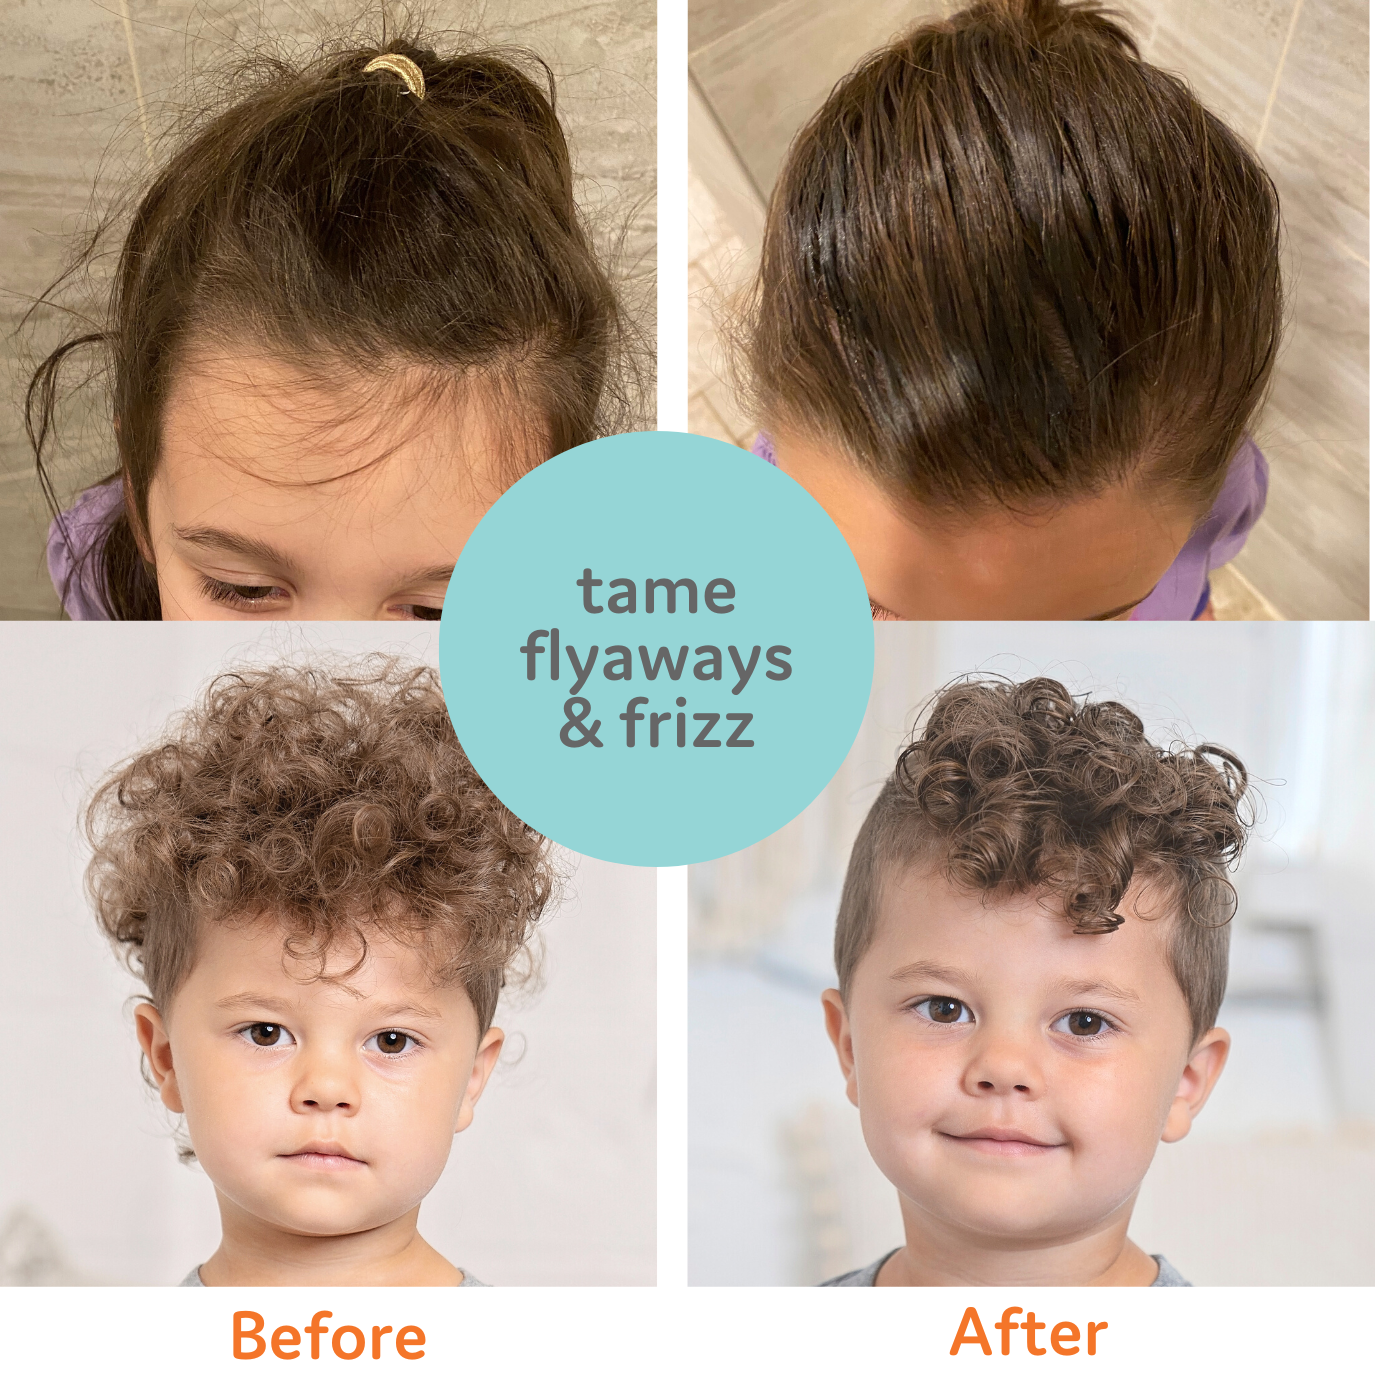 Hair Taming Gel - Natural, Alcohol-free, Frizz-Free Styling for Kids